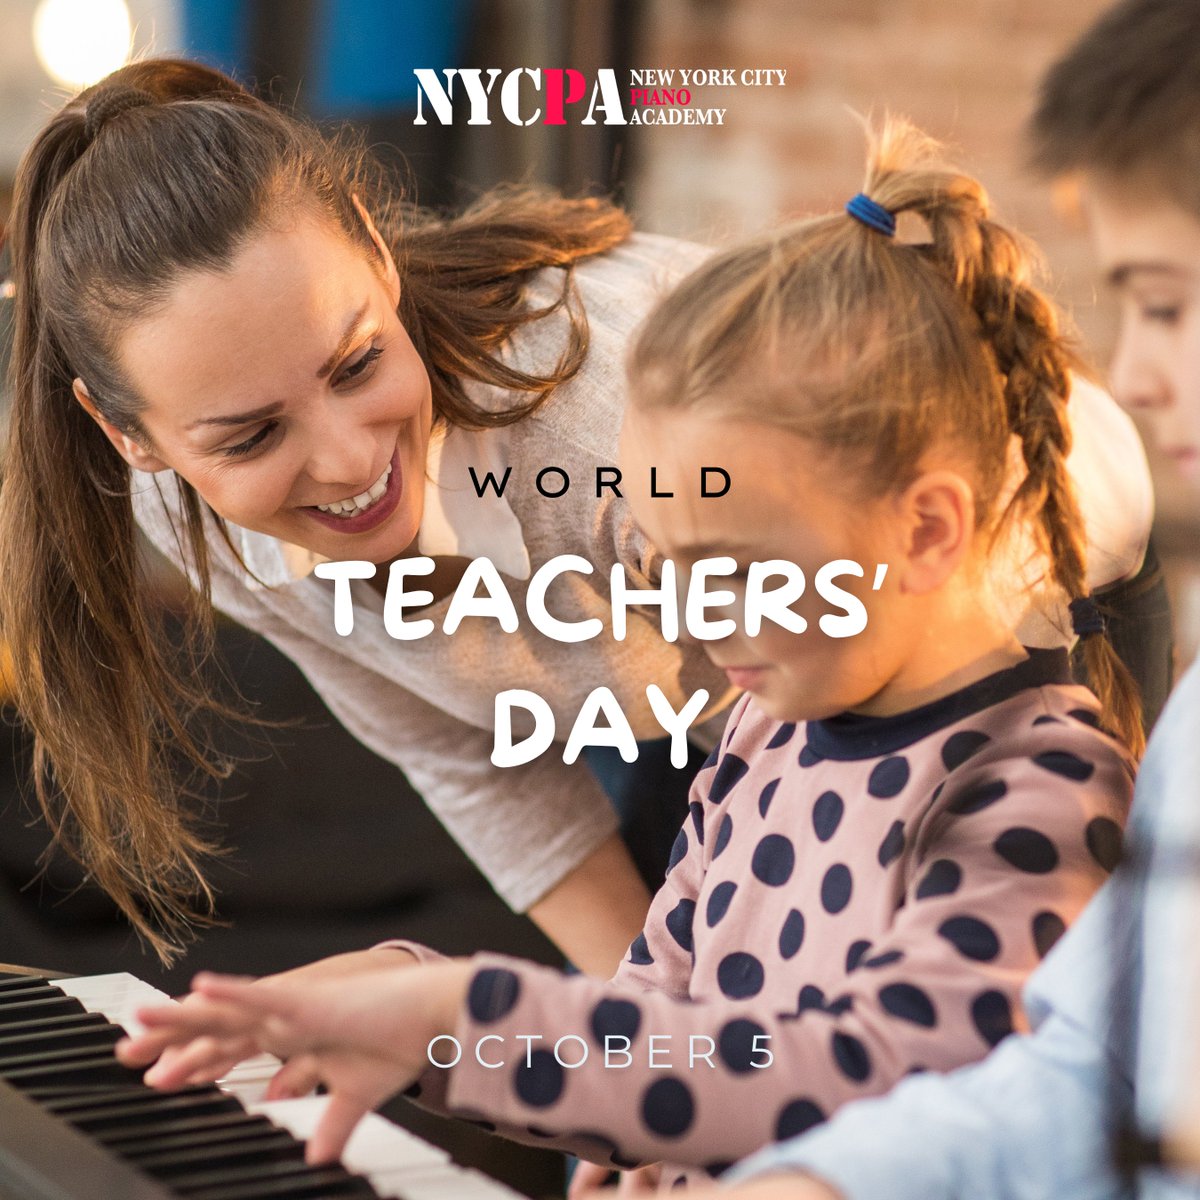 Celebrating #WorldTeachersDay !

We want to express our #appreciation for all the #educators around the world who light up the path of #knowledge, especially the esteemed #facultymembers of #NYCPA. They go above and beyond to empower our students to reach their full potential!